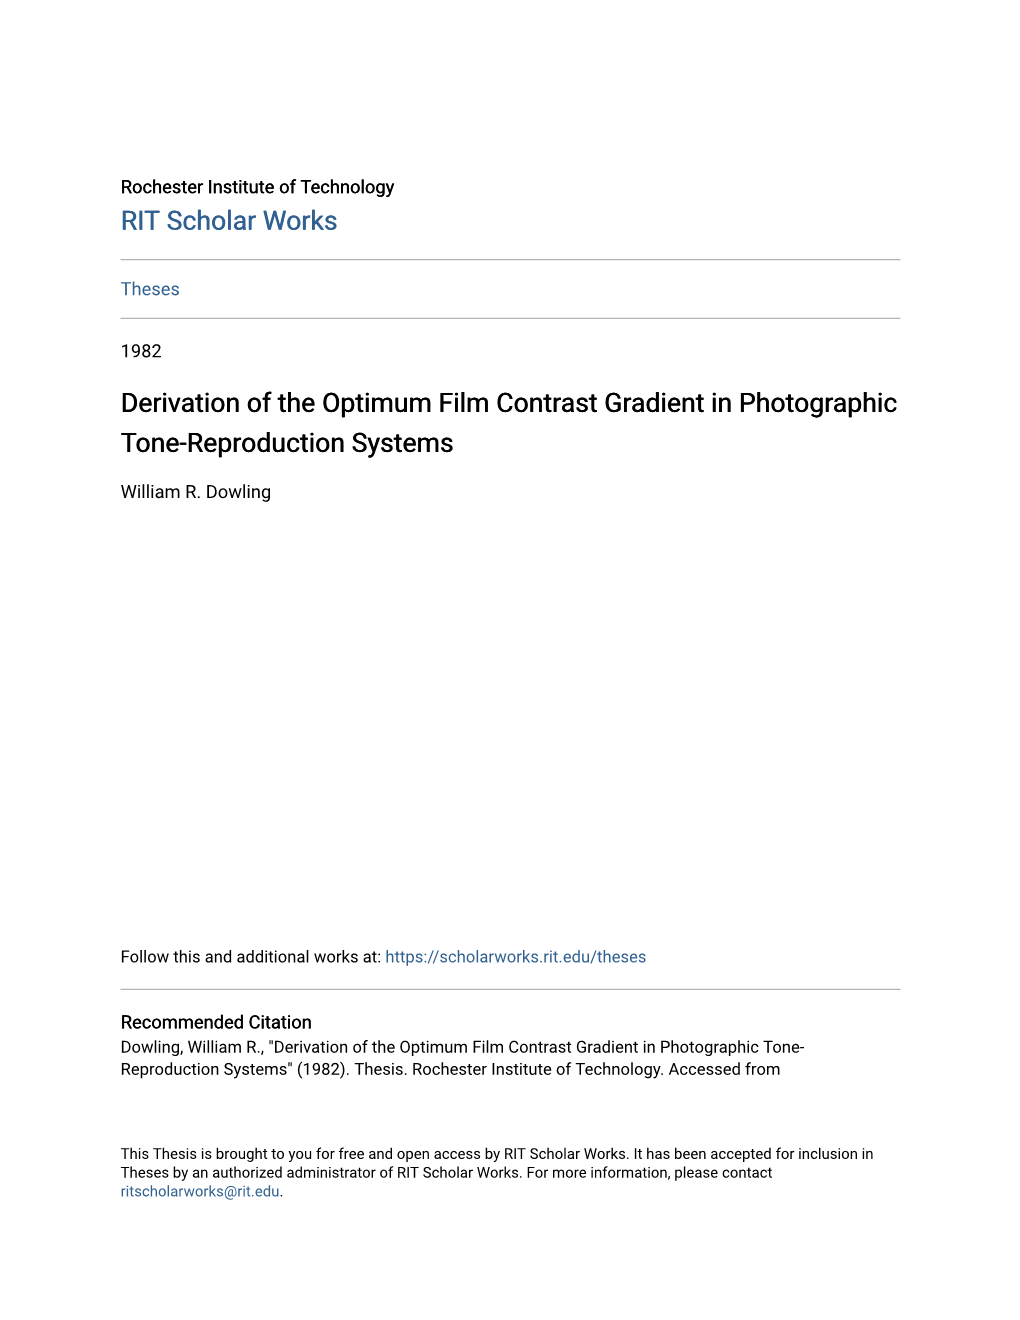 Derivation of the Optimum Film Contrast Gradient in Photographic Tone-Reproduction Systems